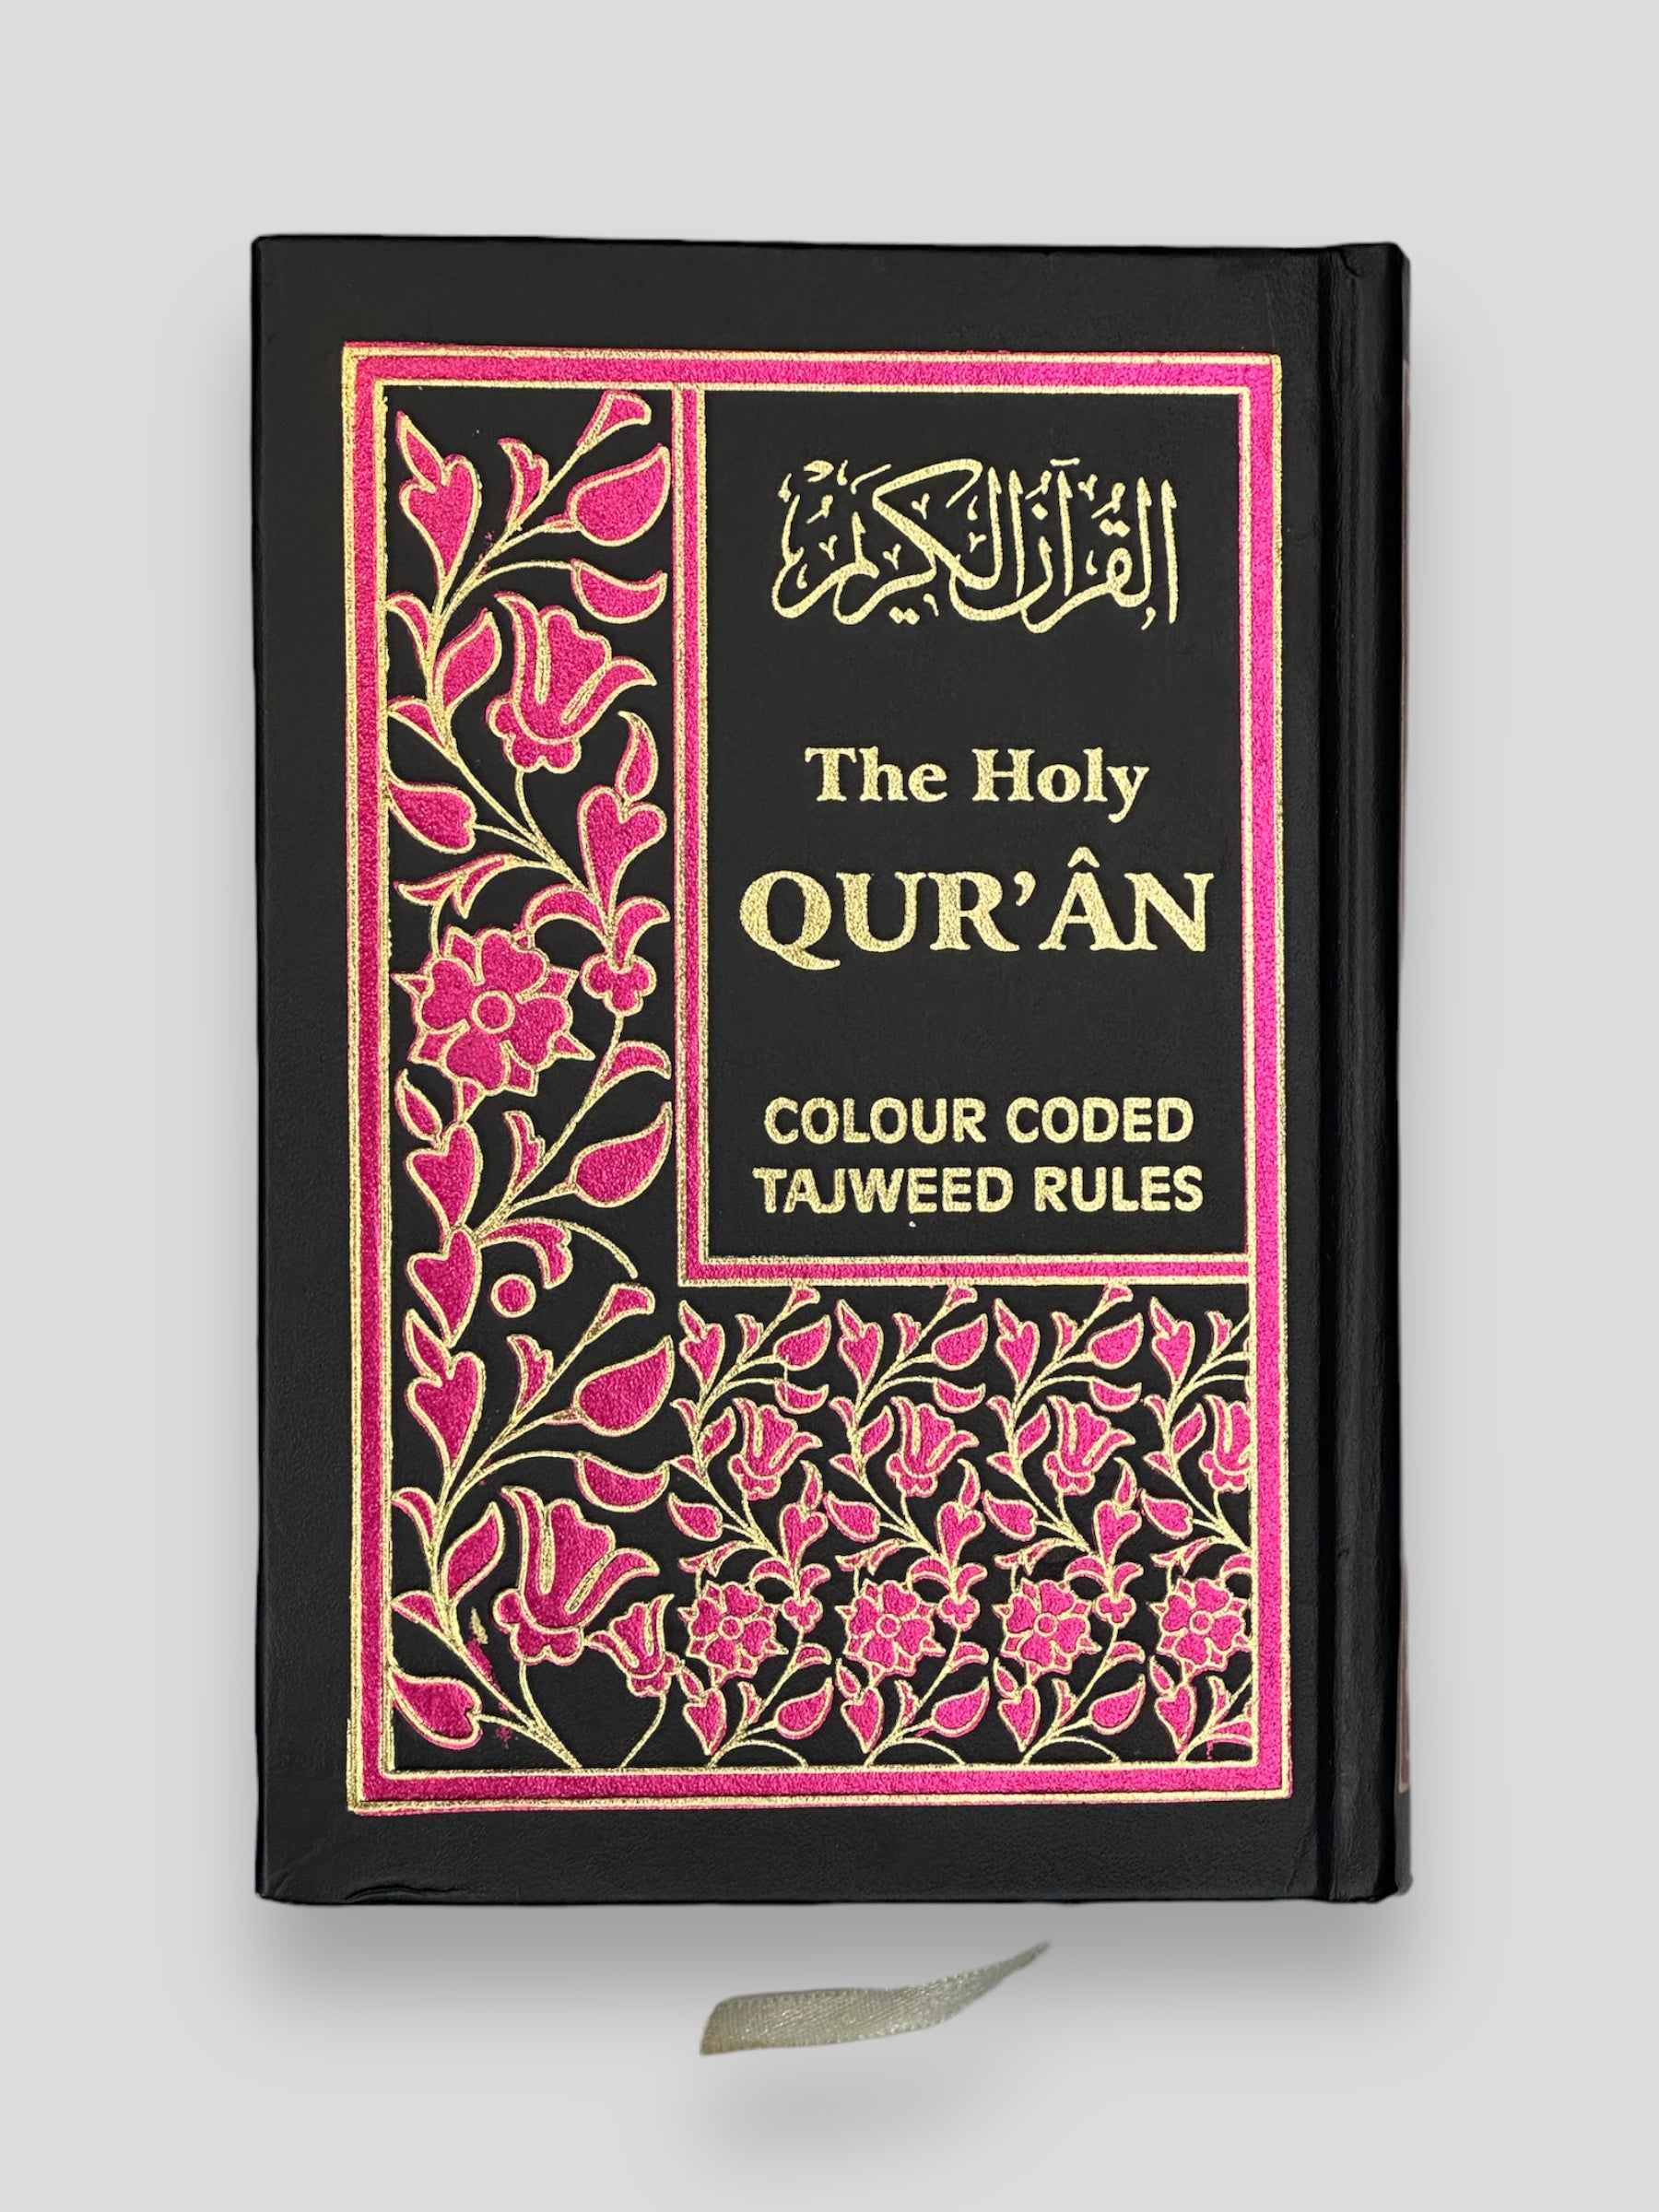 The Holy Quran Colour Coded Tajweed Rules